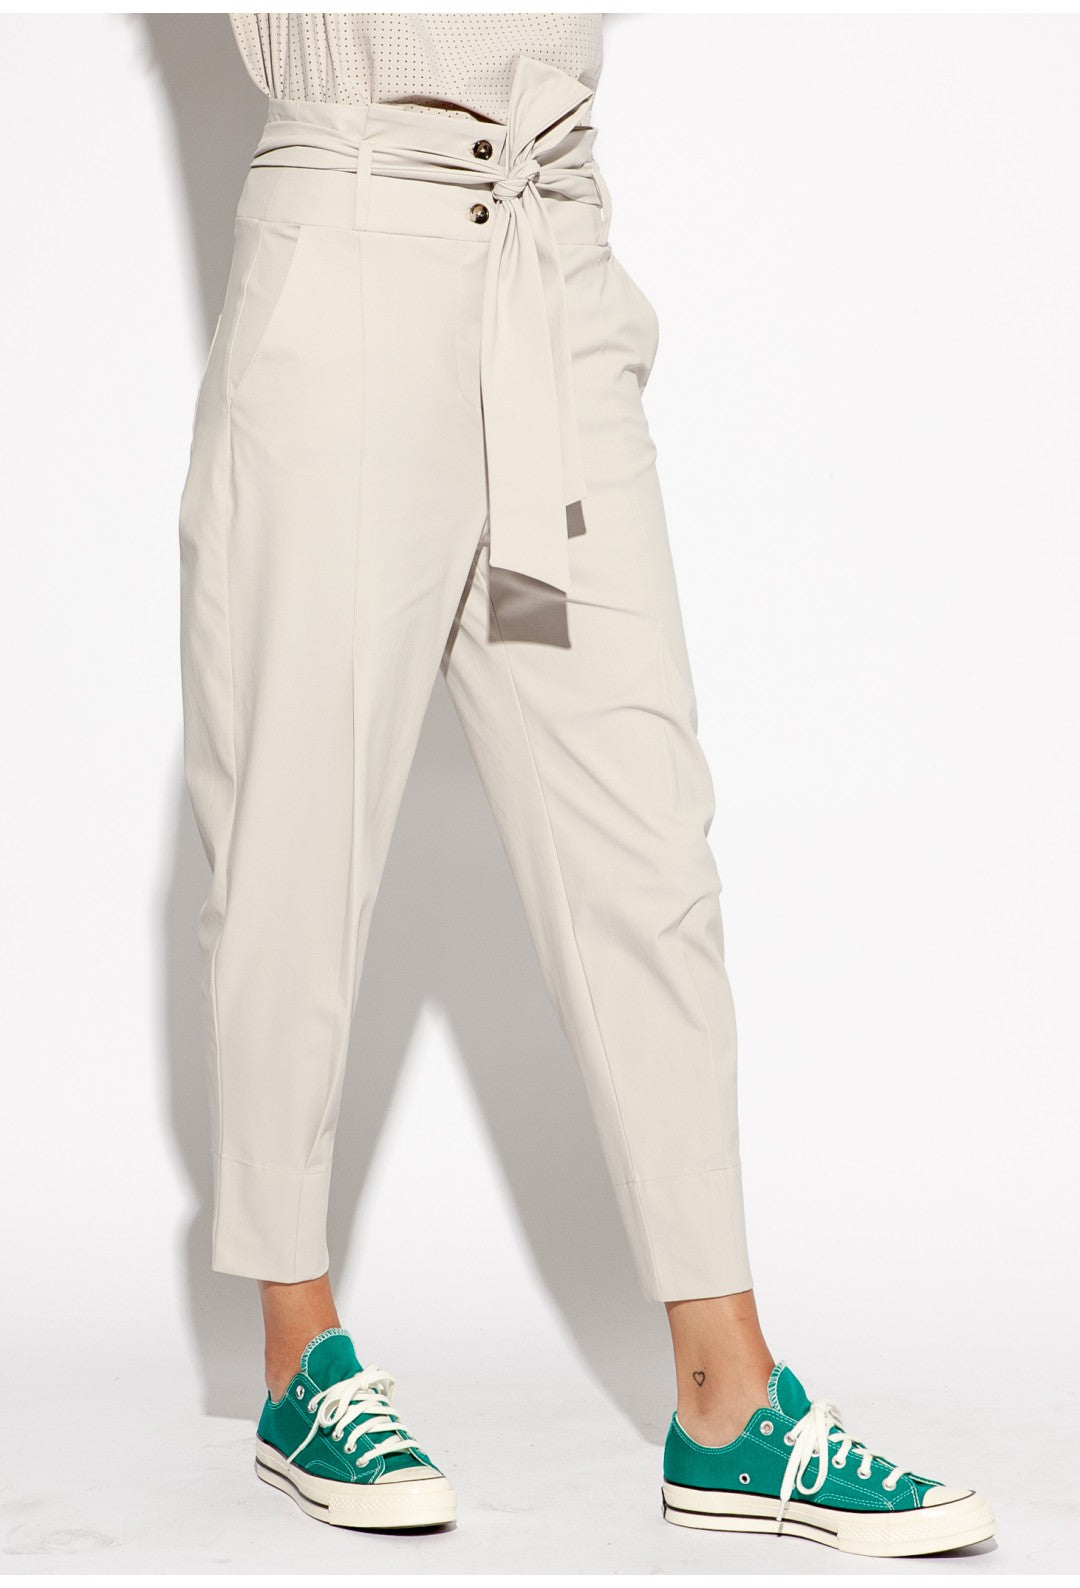 Front right side bottom half view of a woman wearing the Indies Collin Pant. This pant is pebble/beige colored with a straight leg and a high rise waistband with a belt.